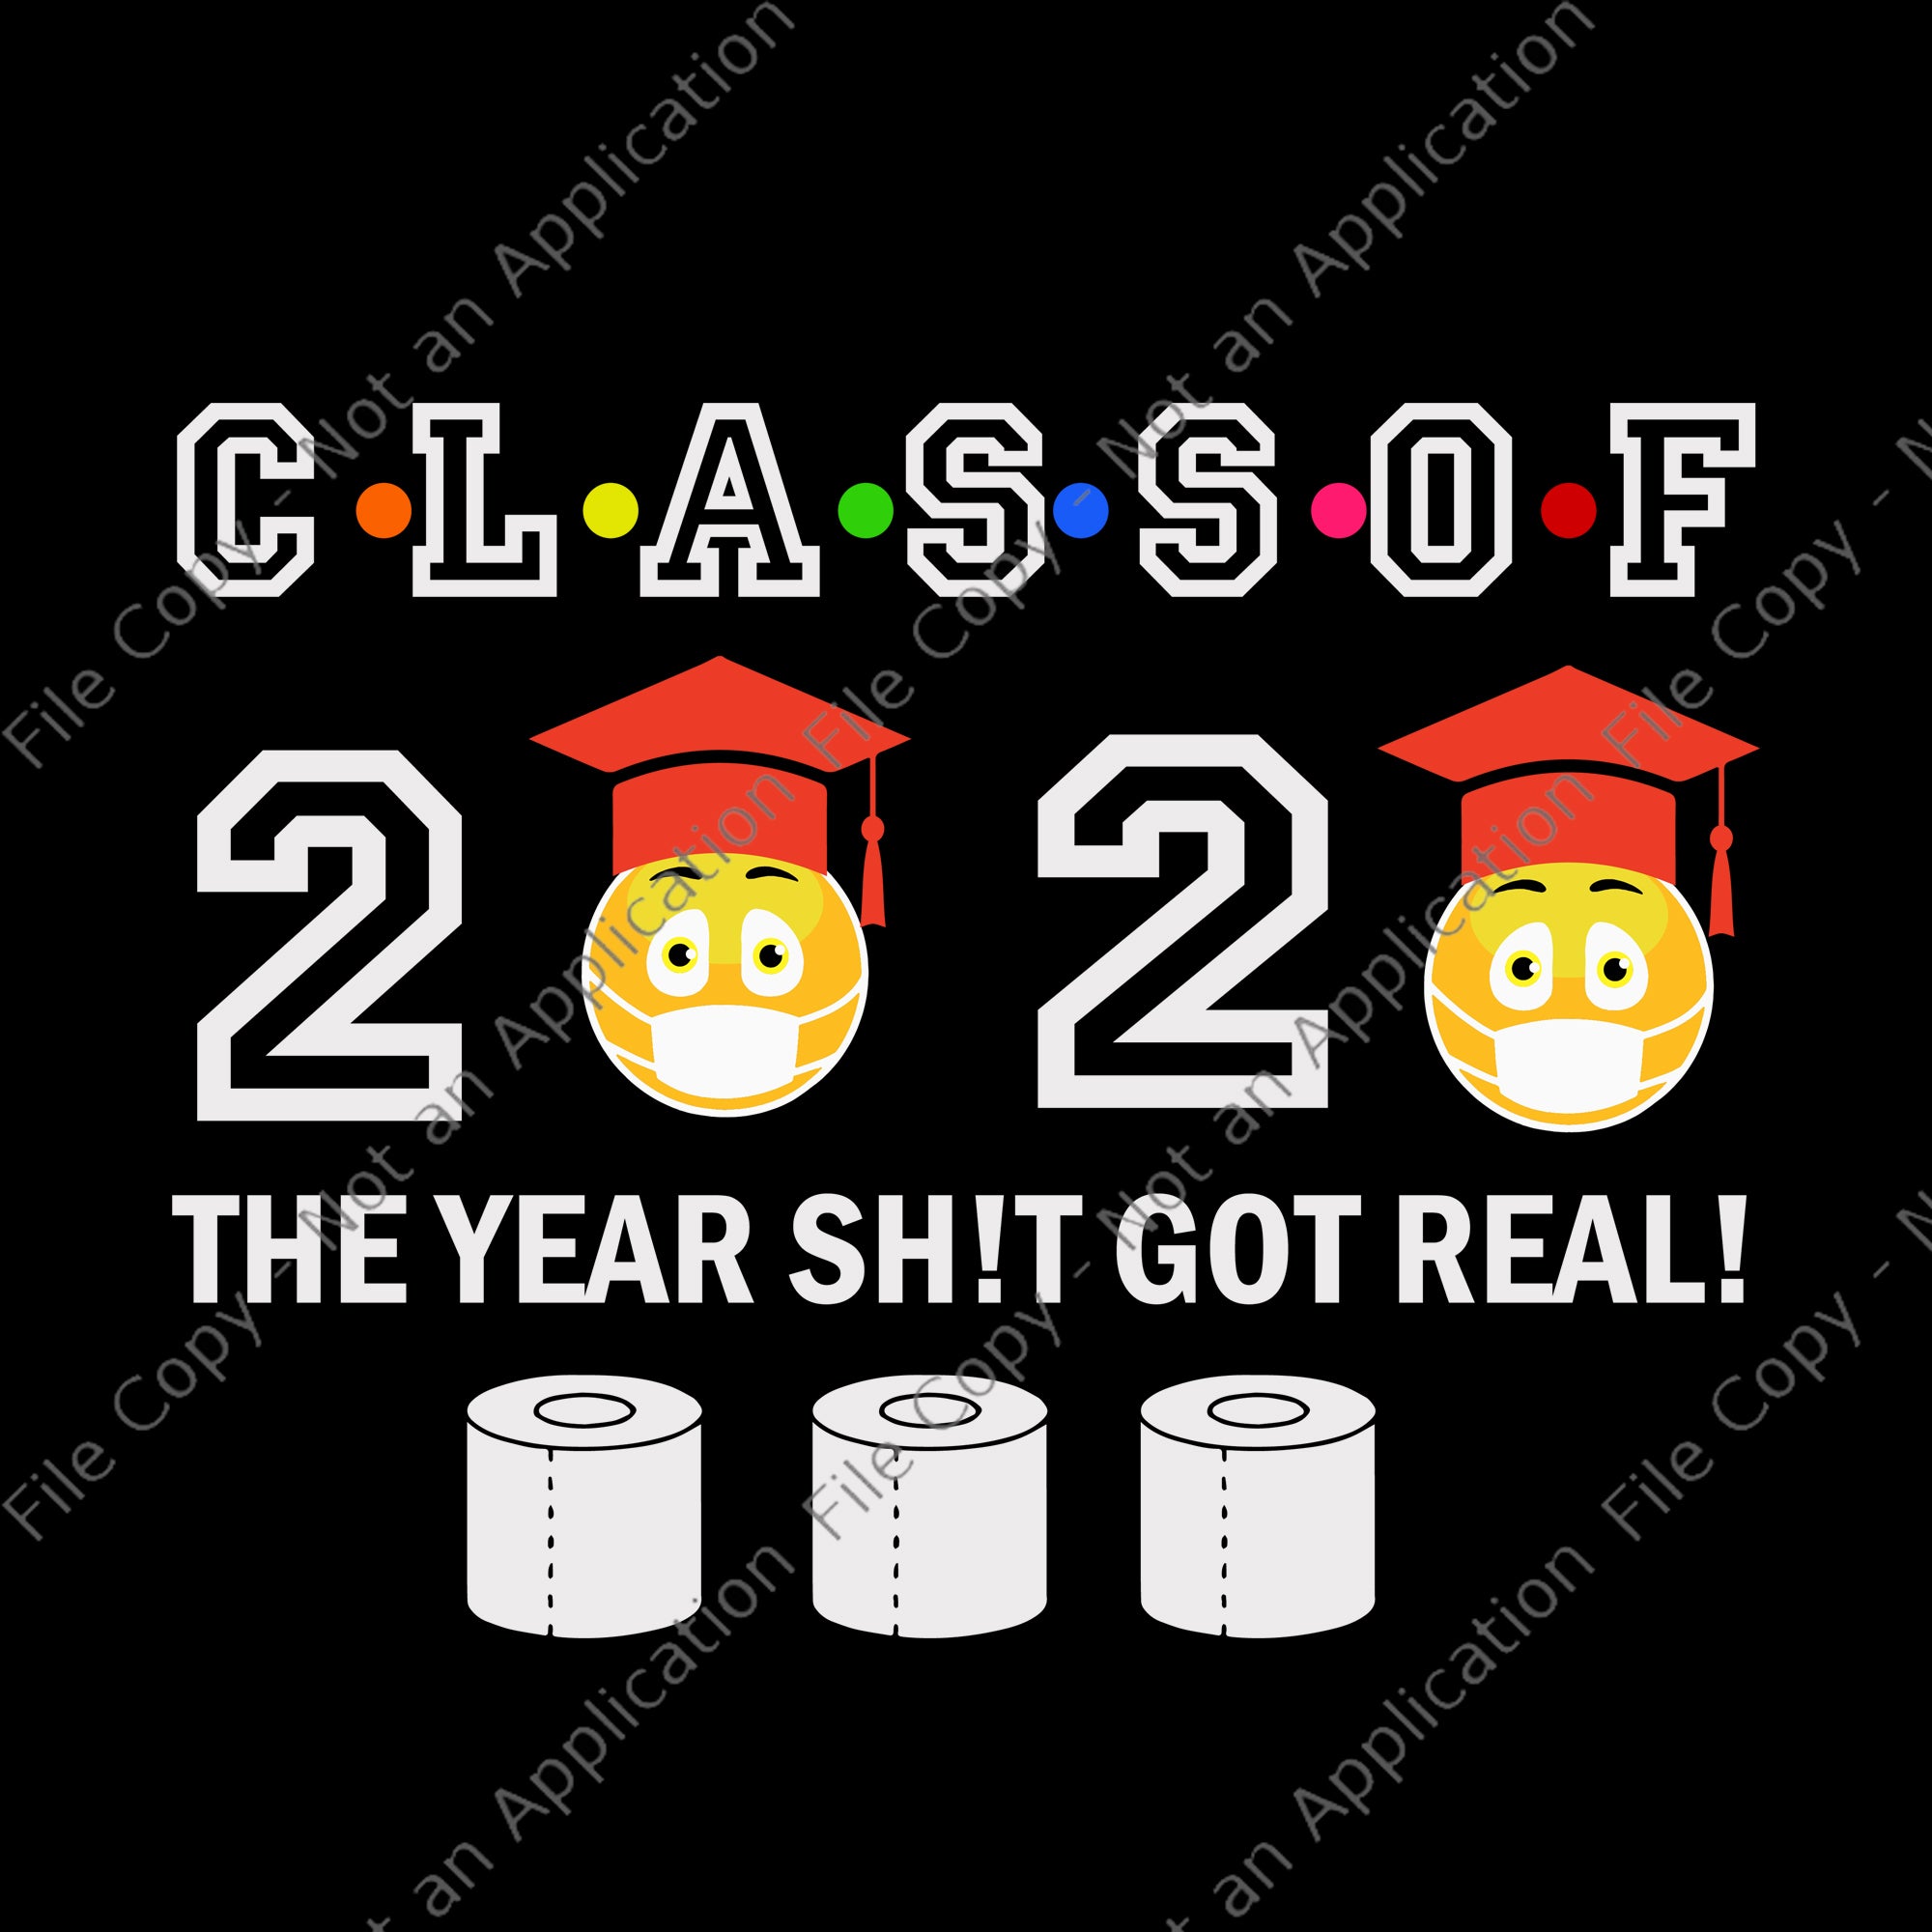 Class of 2020 the year when shit got real svg, class of 2020 the year when shit got real, senior 2020 svg, senior 2020